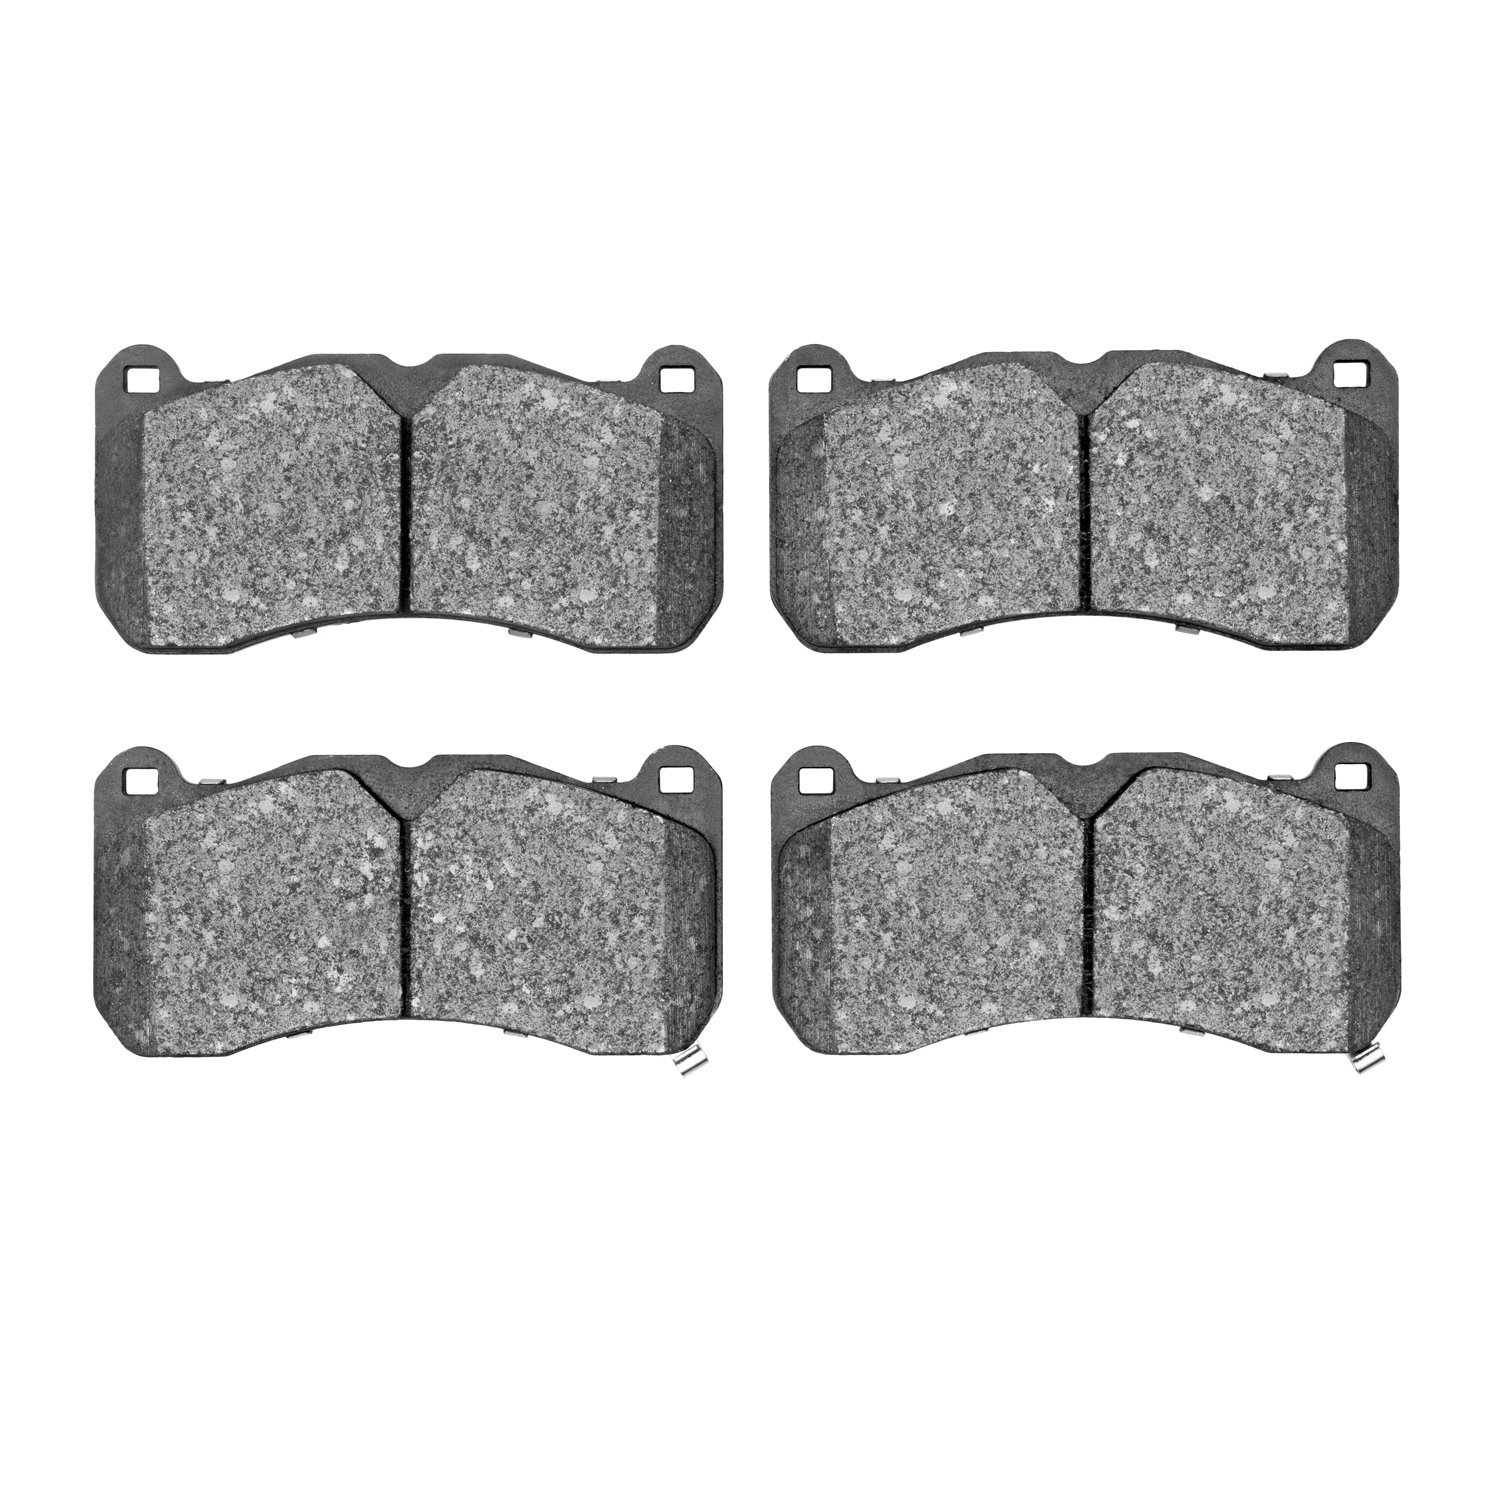 1310-1666-00 3000-Series Ceramic Brake Pads, 2013-2014 Ford/Lincoln/Mercury/Mazda, Position: Front